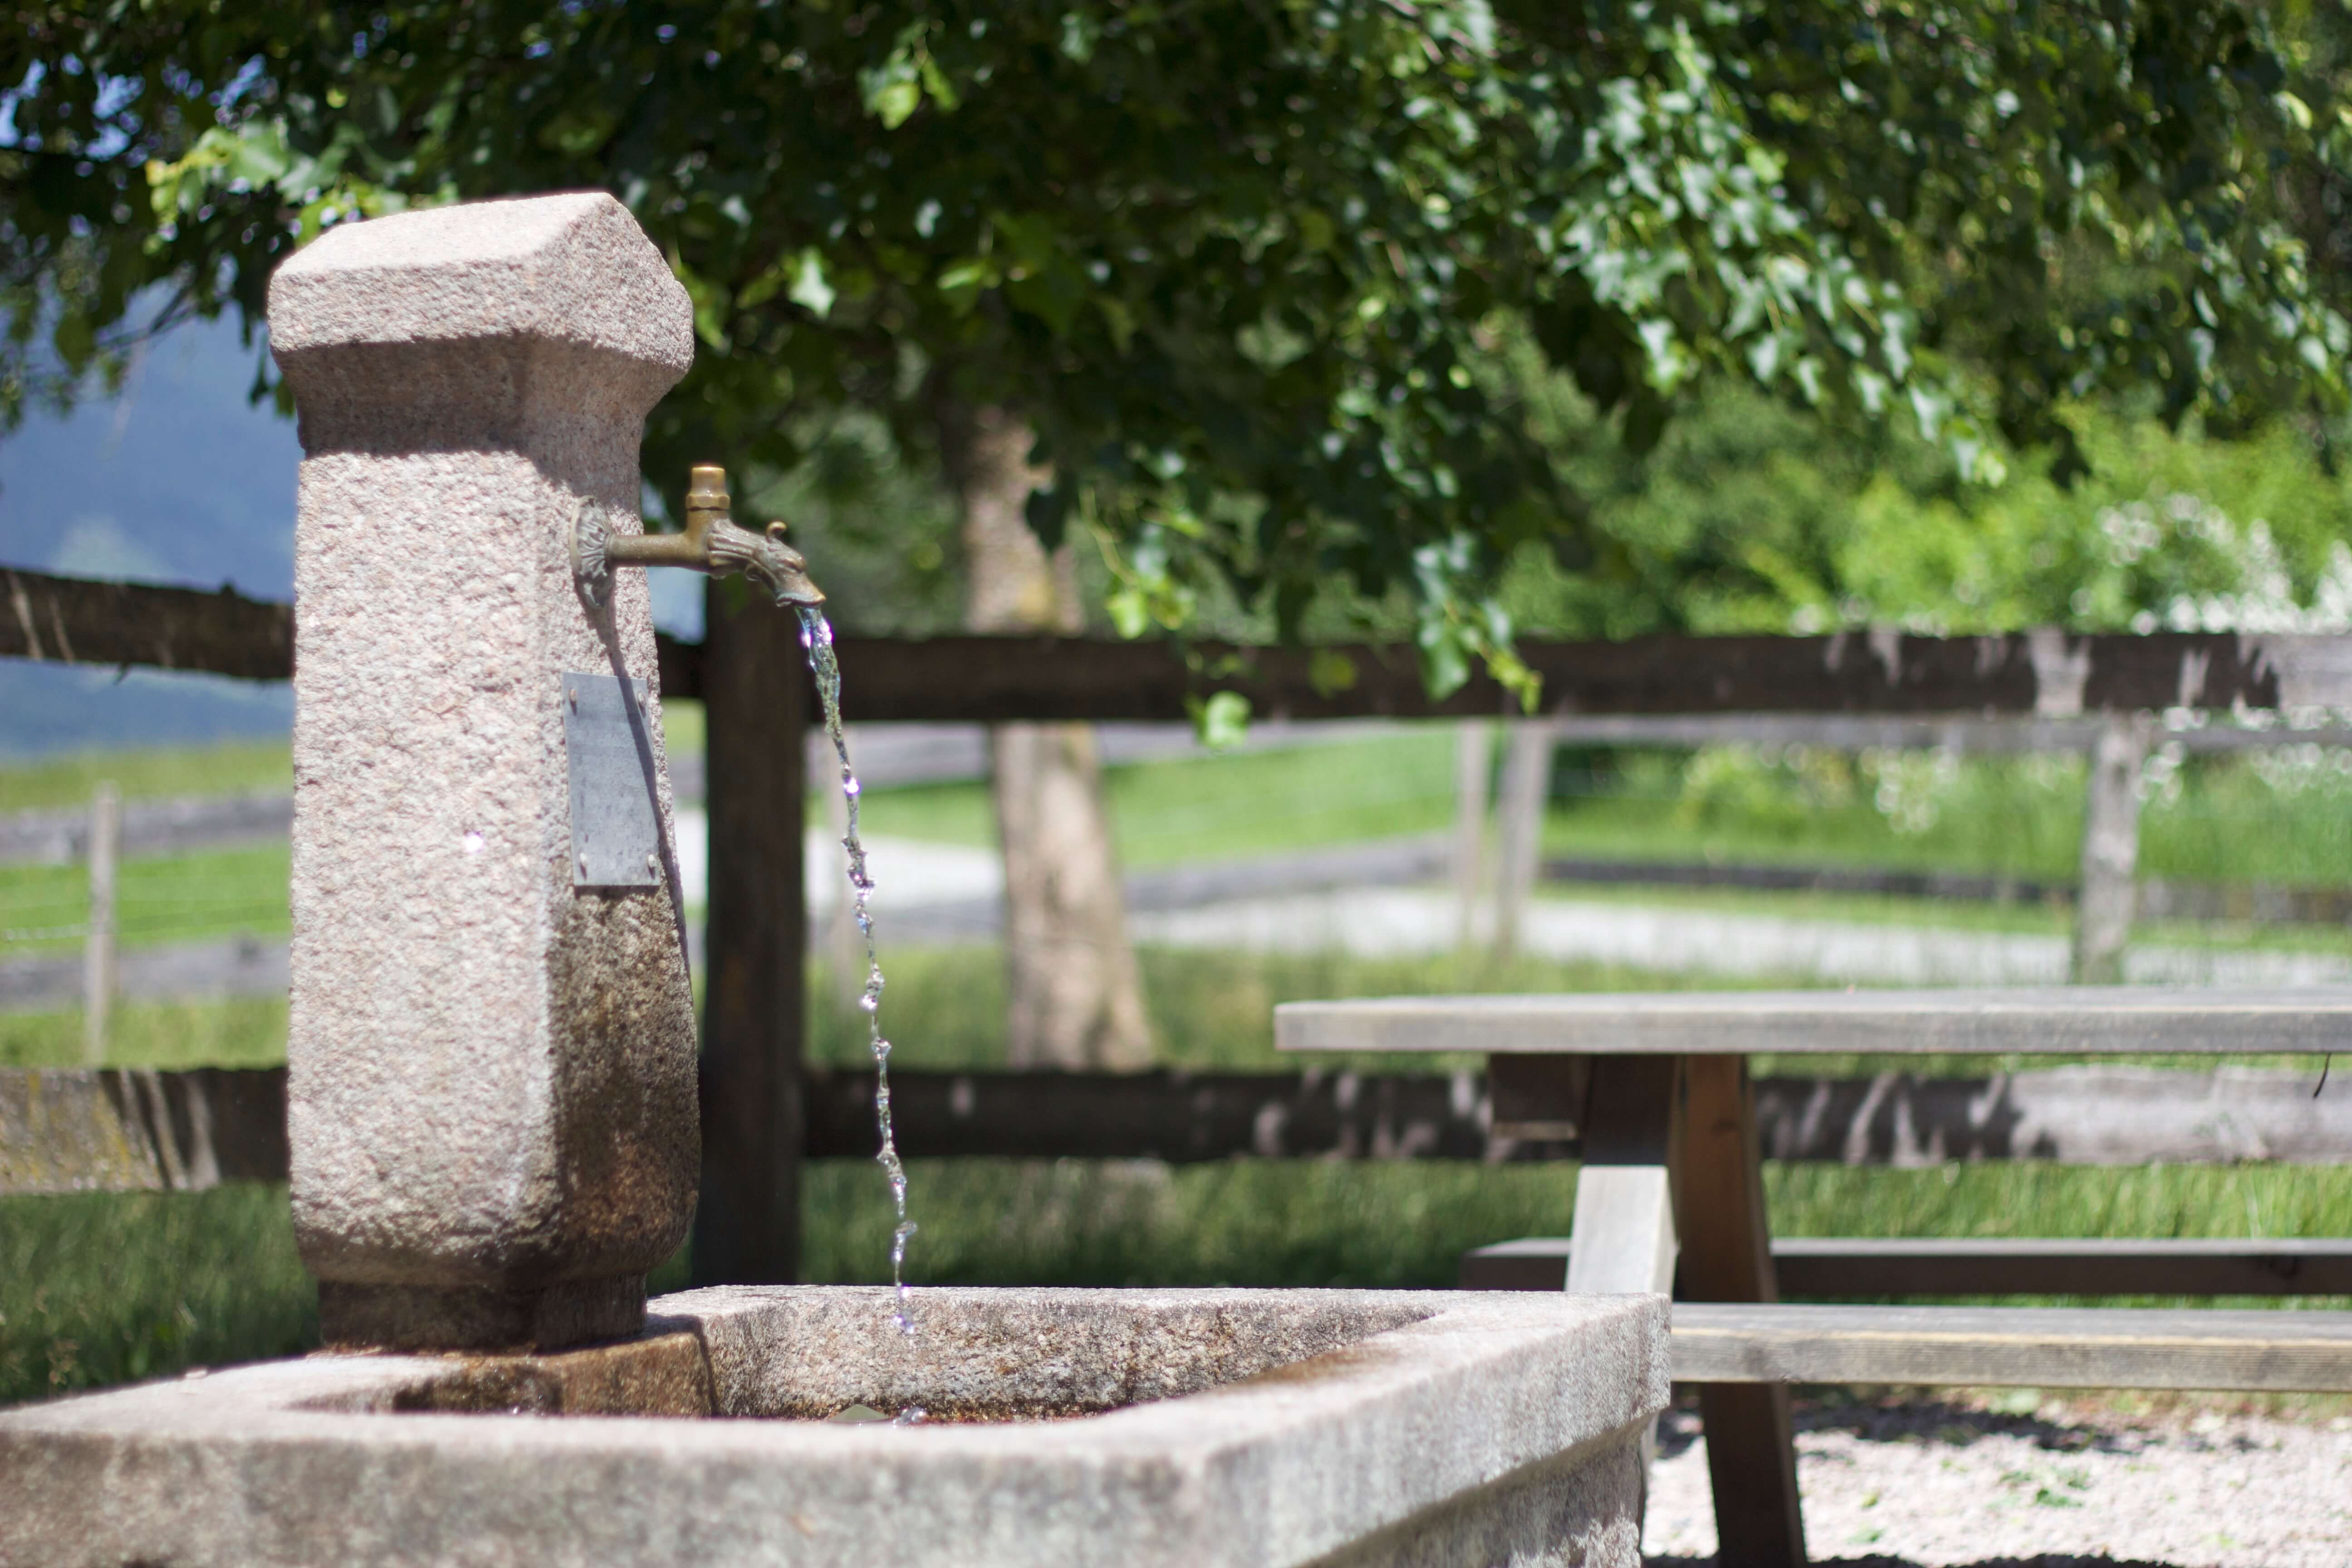 Waterfountain and bench